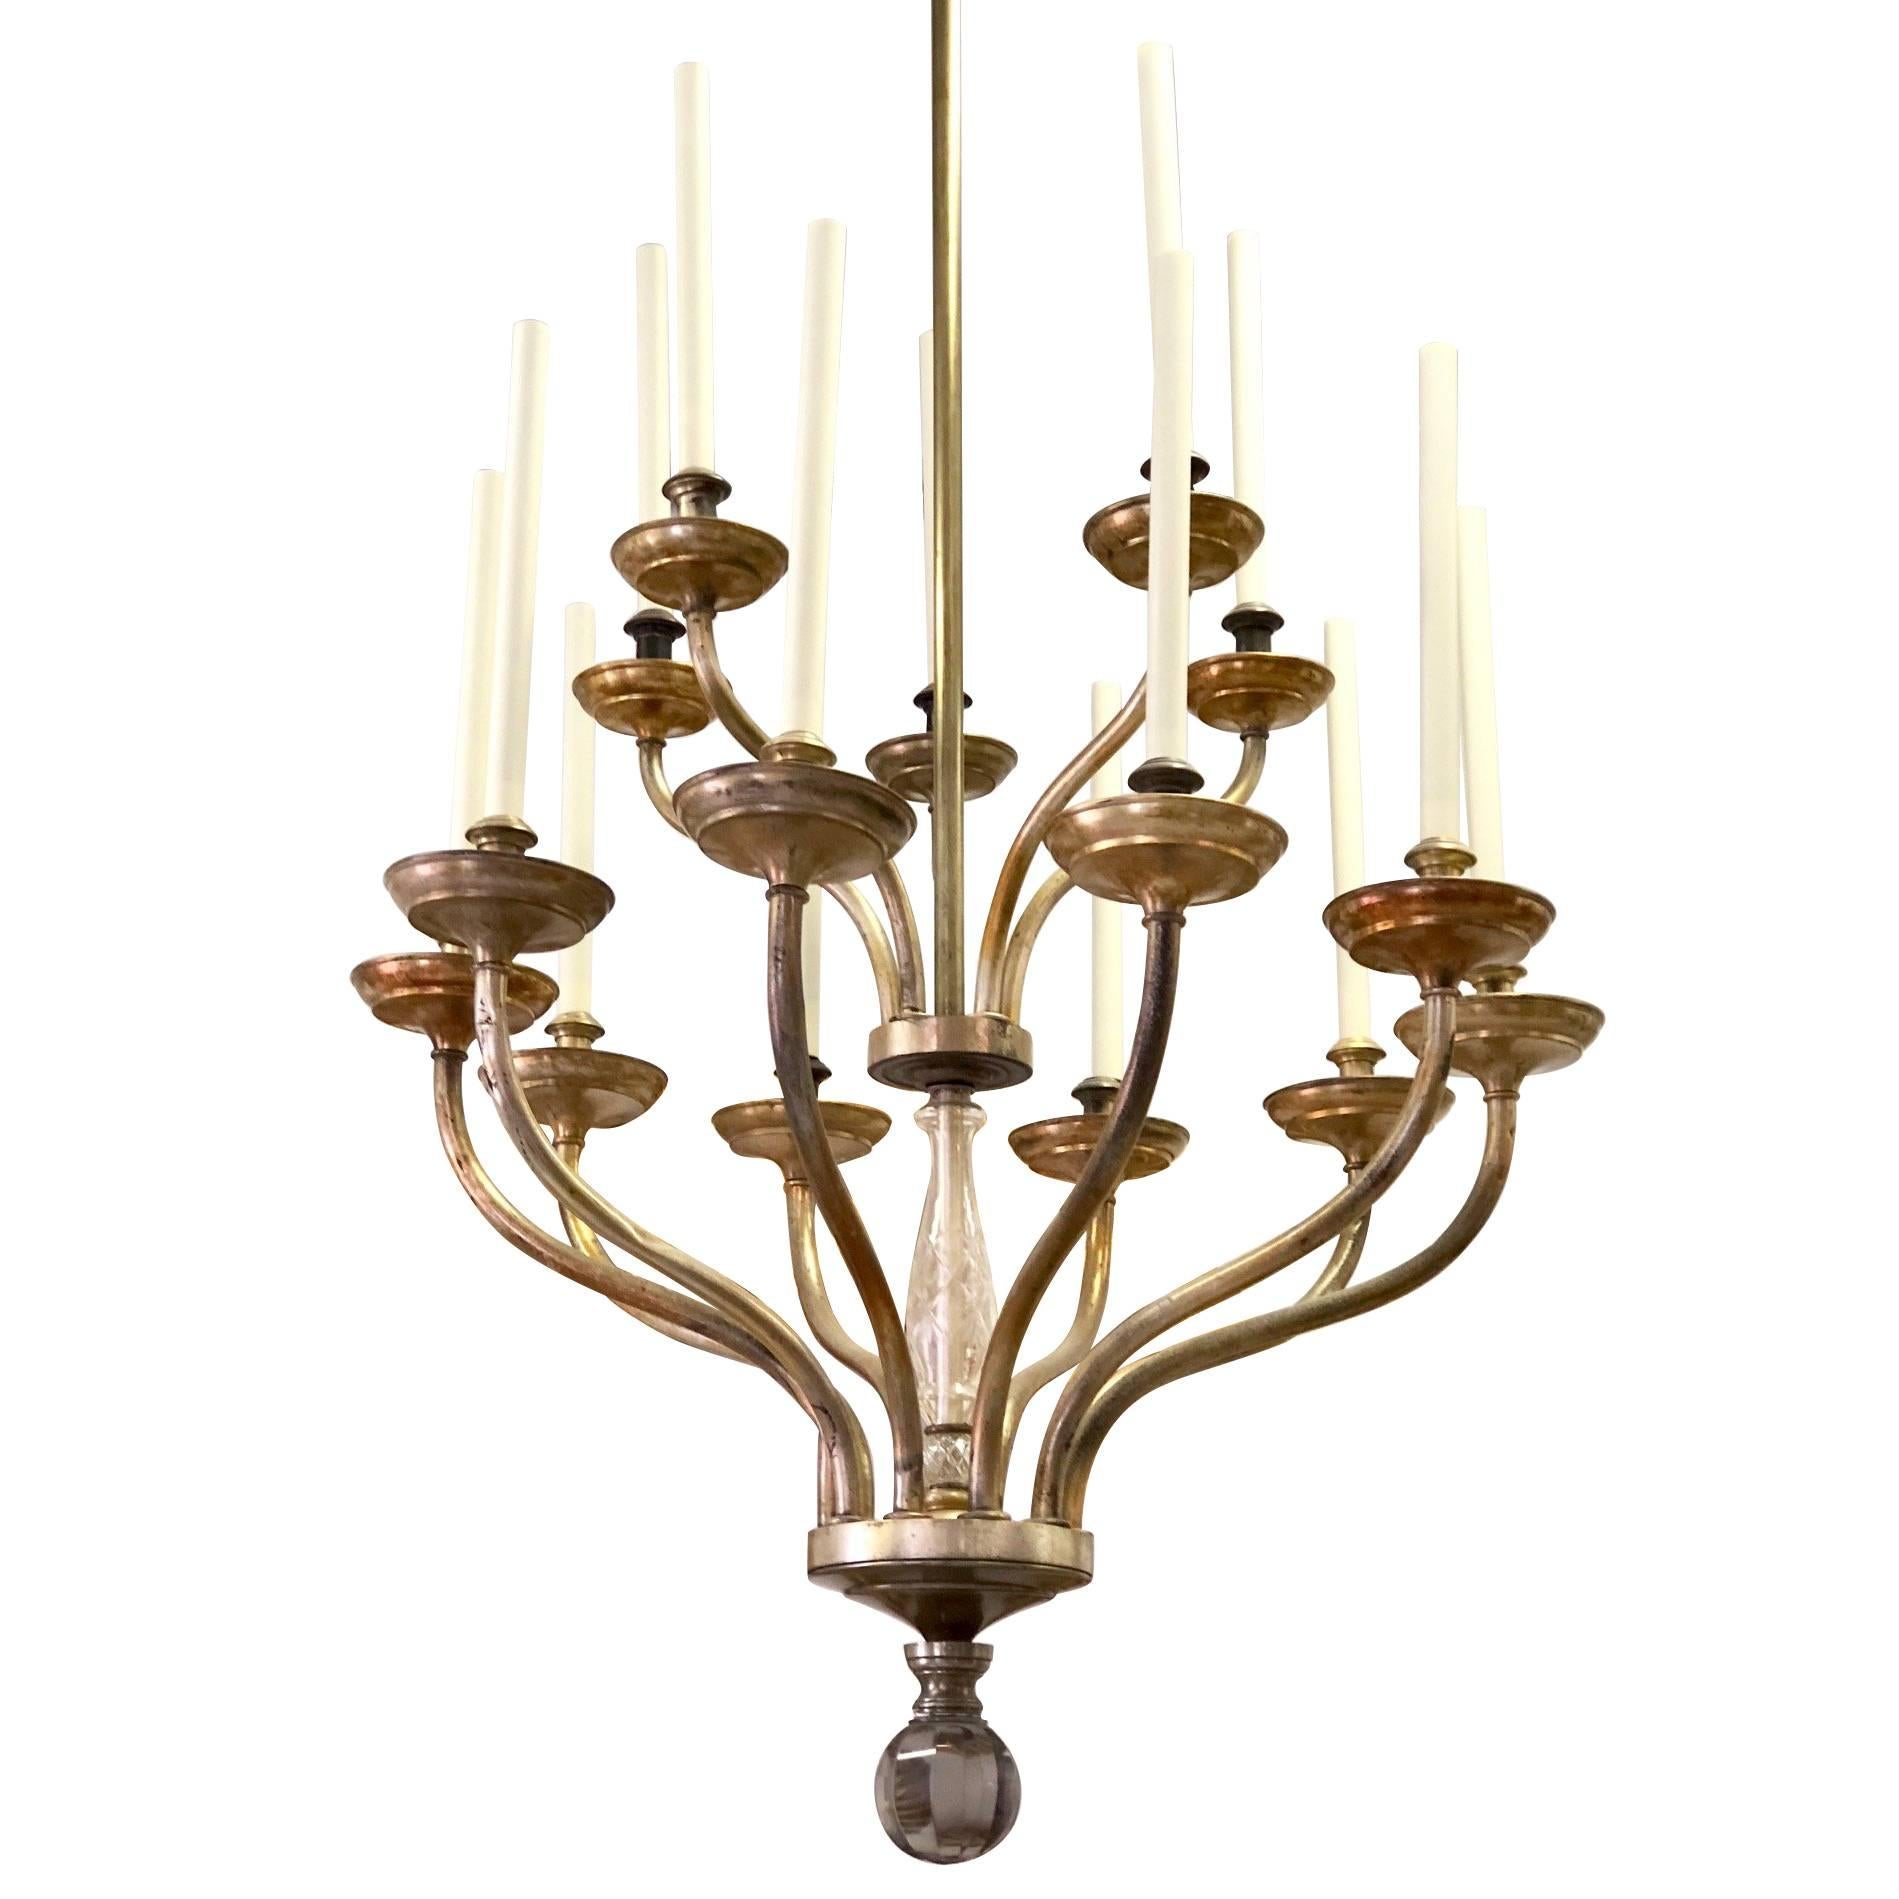 A large dramatic, yet sober double tier Italian Mid-Century Modern neoclassical chandelier attributed to Carlo Scarpa composed in a simple, pure pattern with 15 arms set with ten arms on the lower level and five arms on the upper level. The